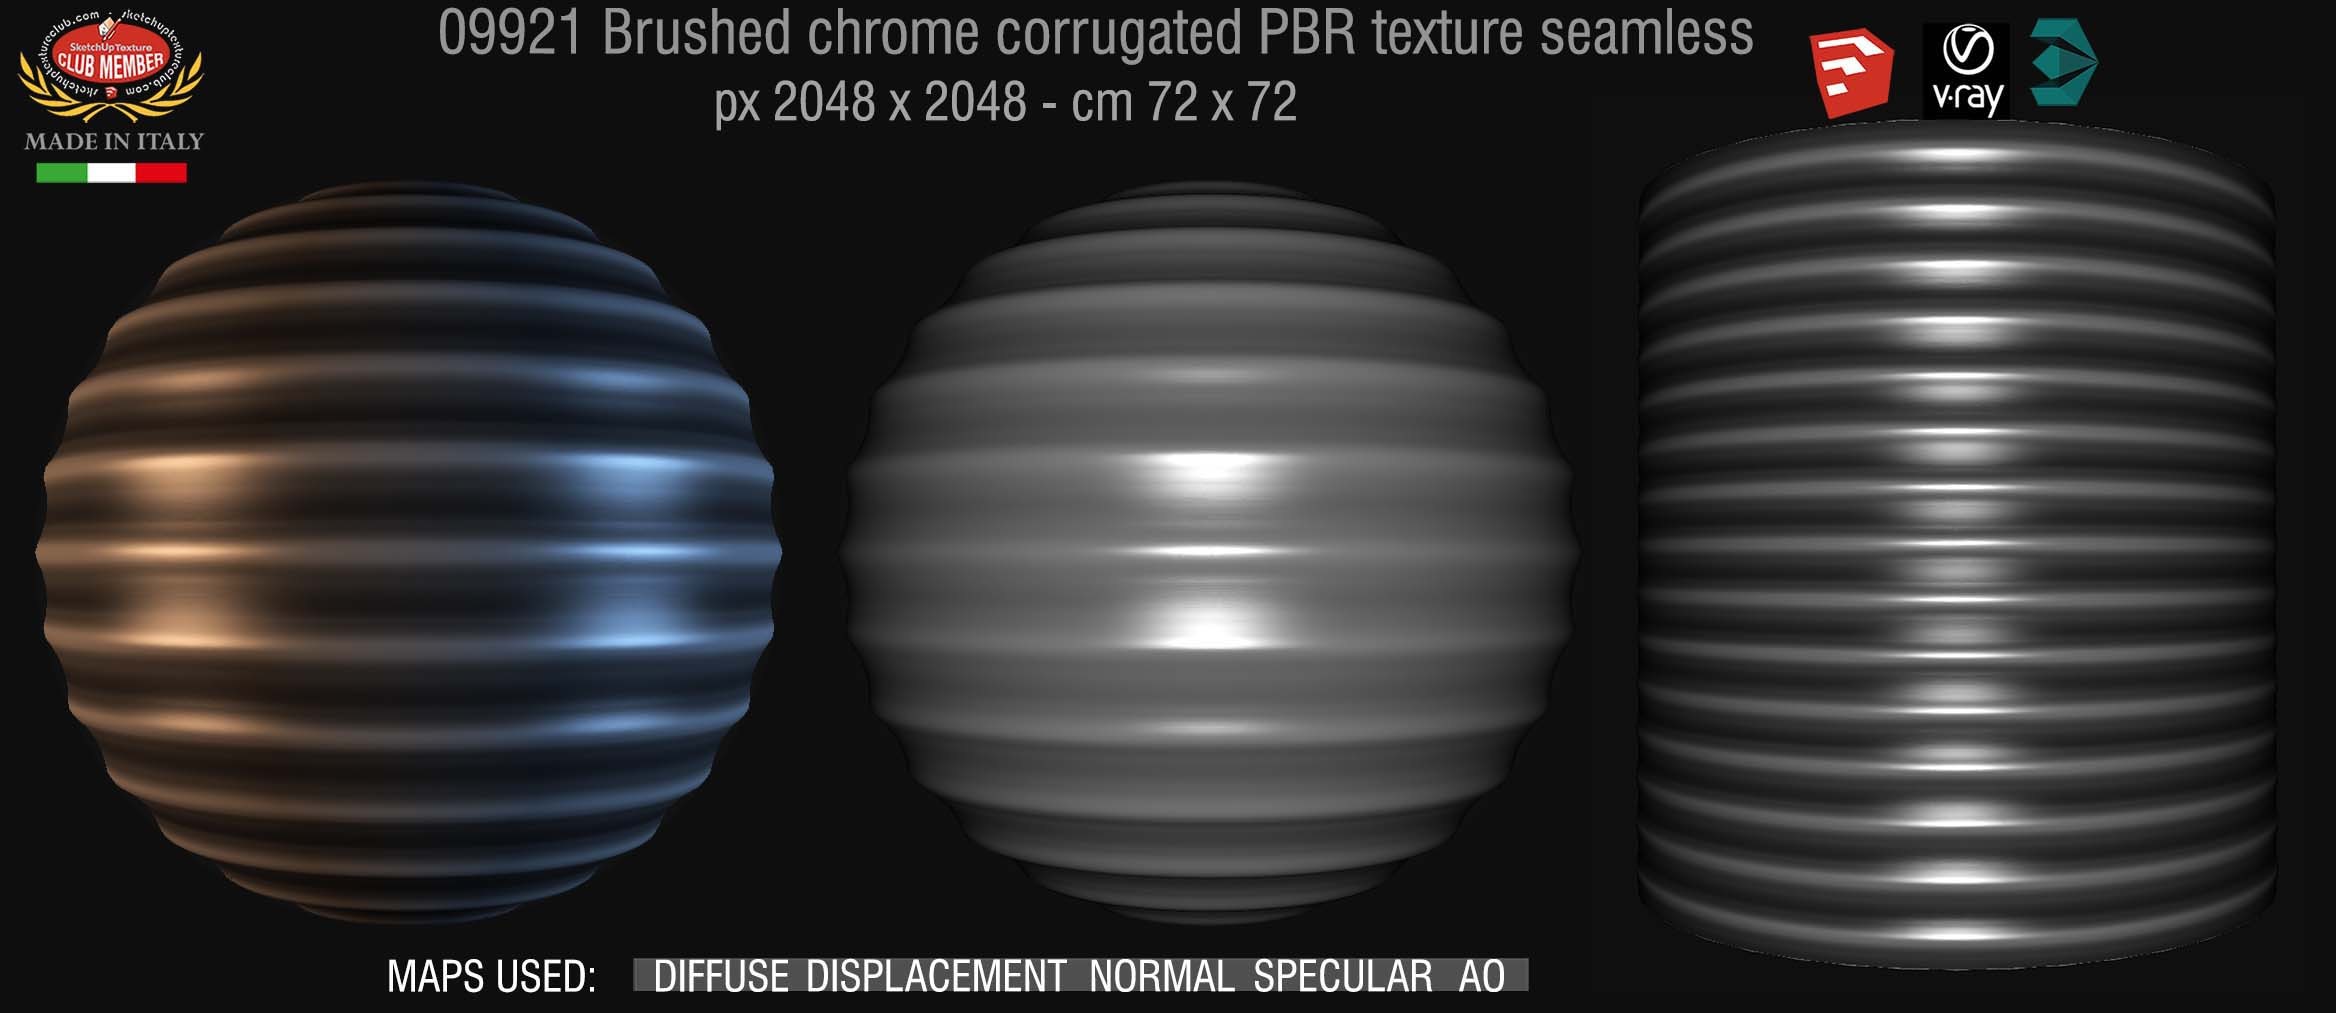 09921 Brushed chrome corrugated metal PBR texture seamless DEMO